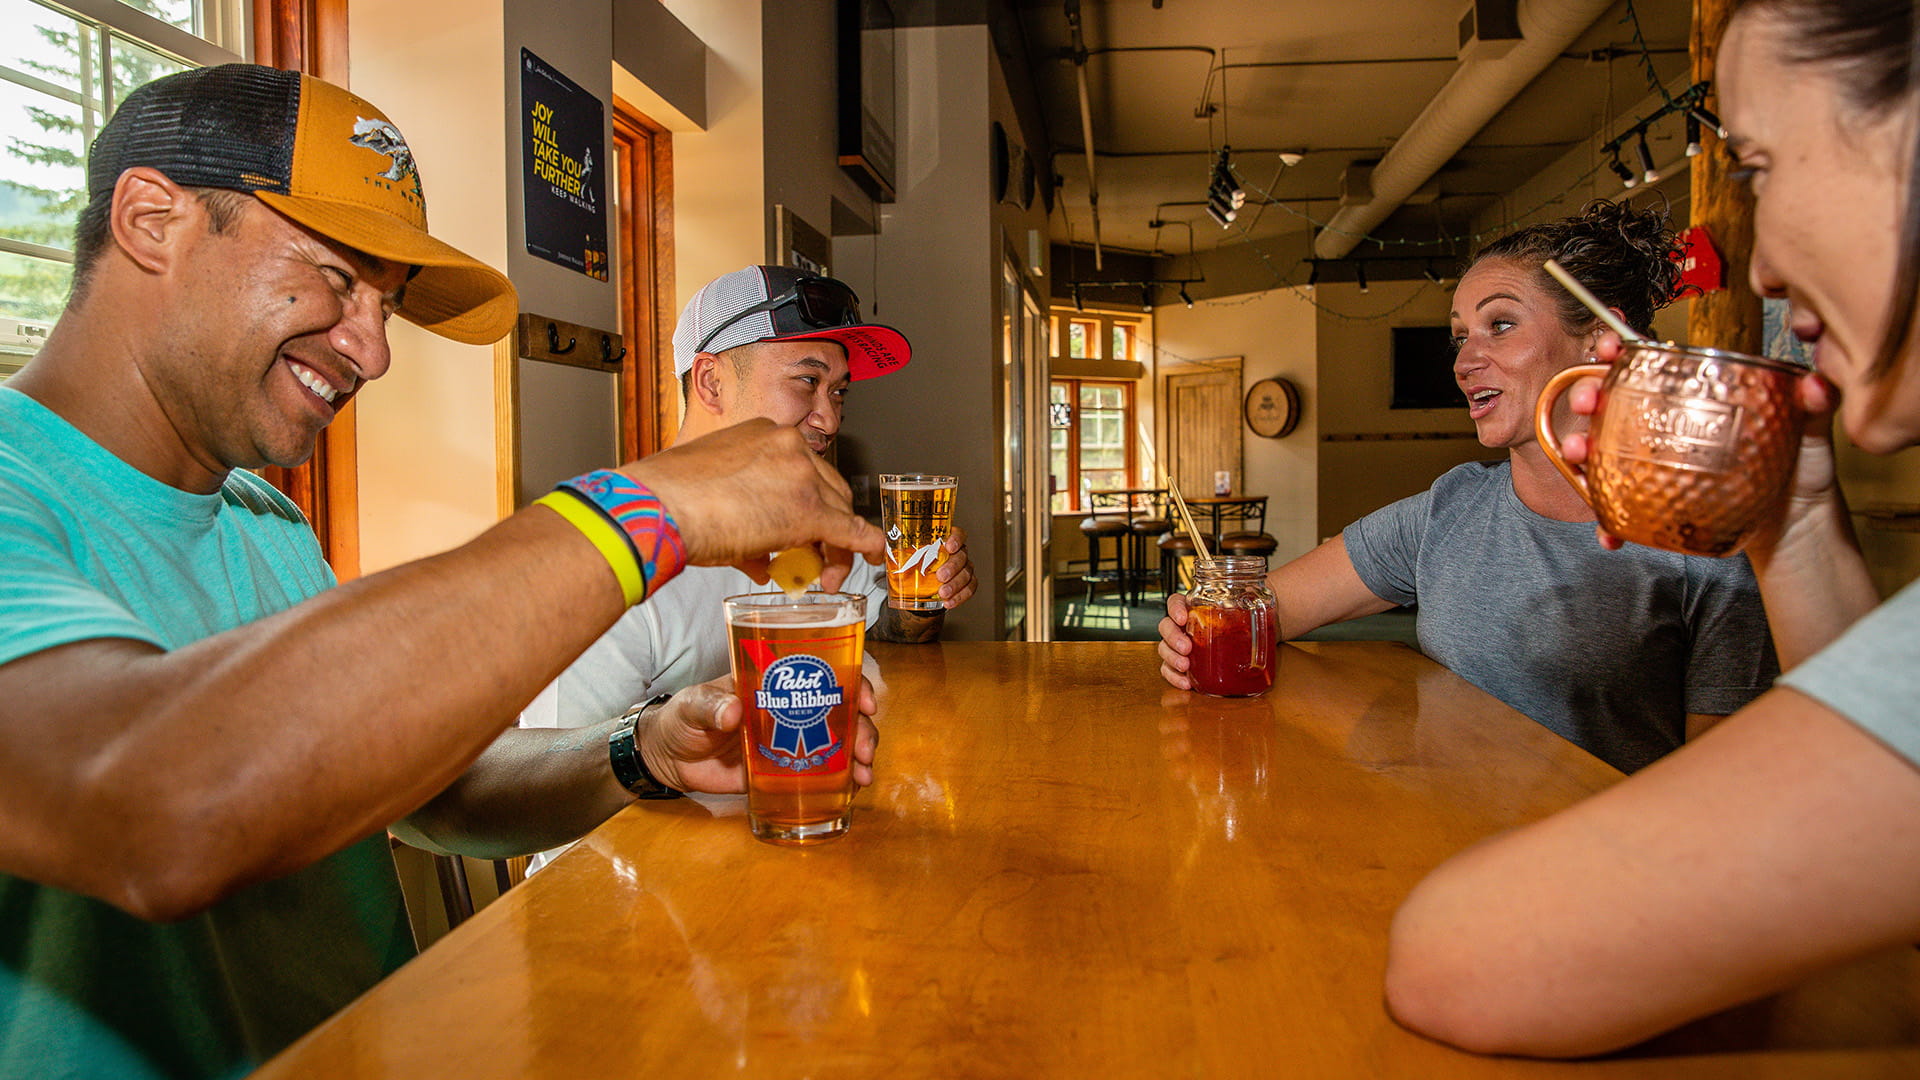 Friends enjoying drinks at The Thirsty Squirrel at Solitude Mountain Resort